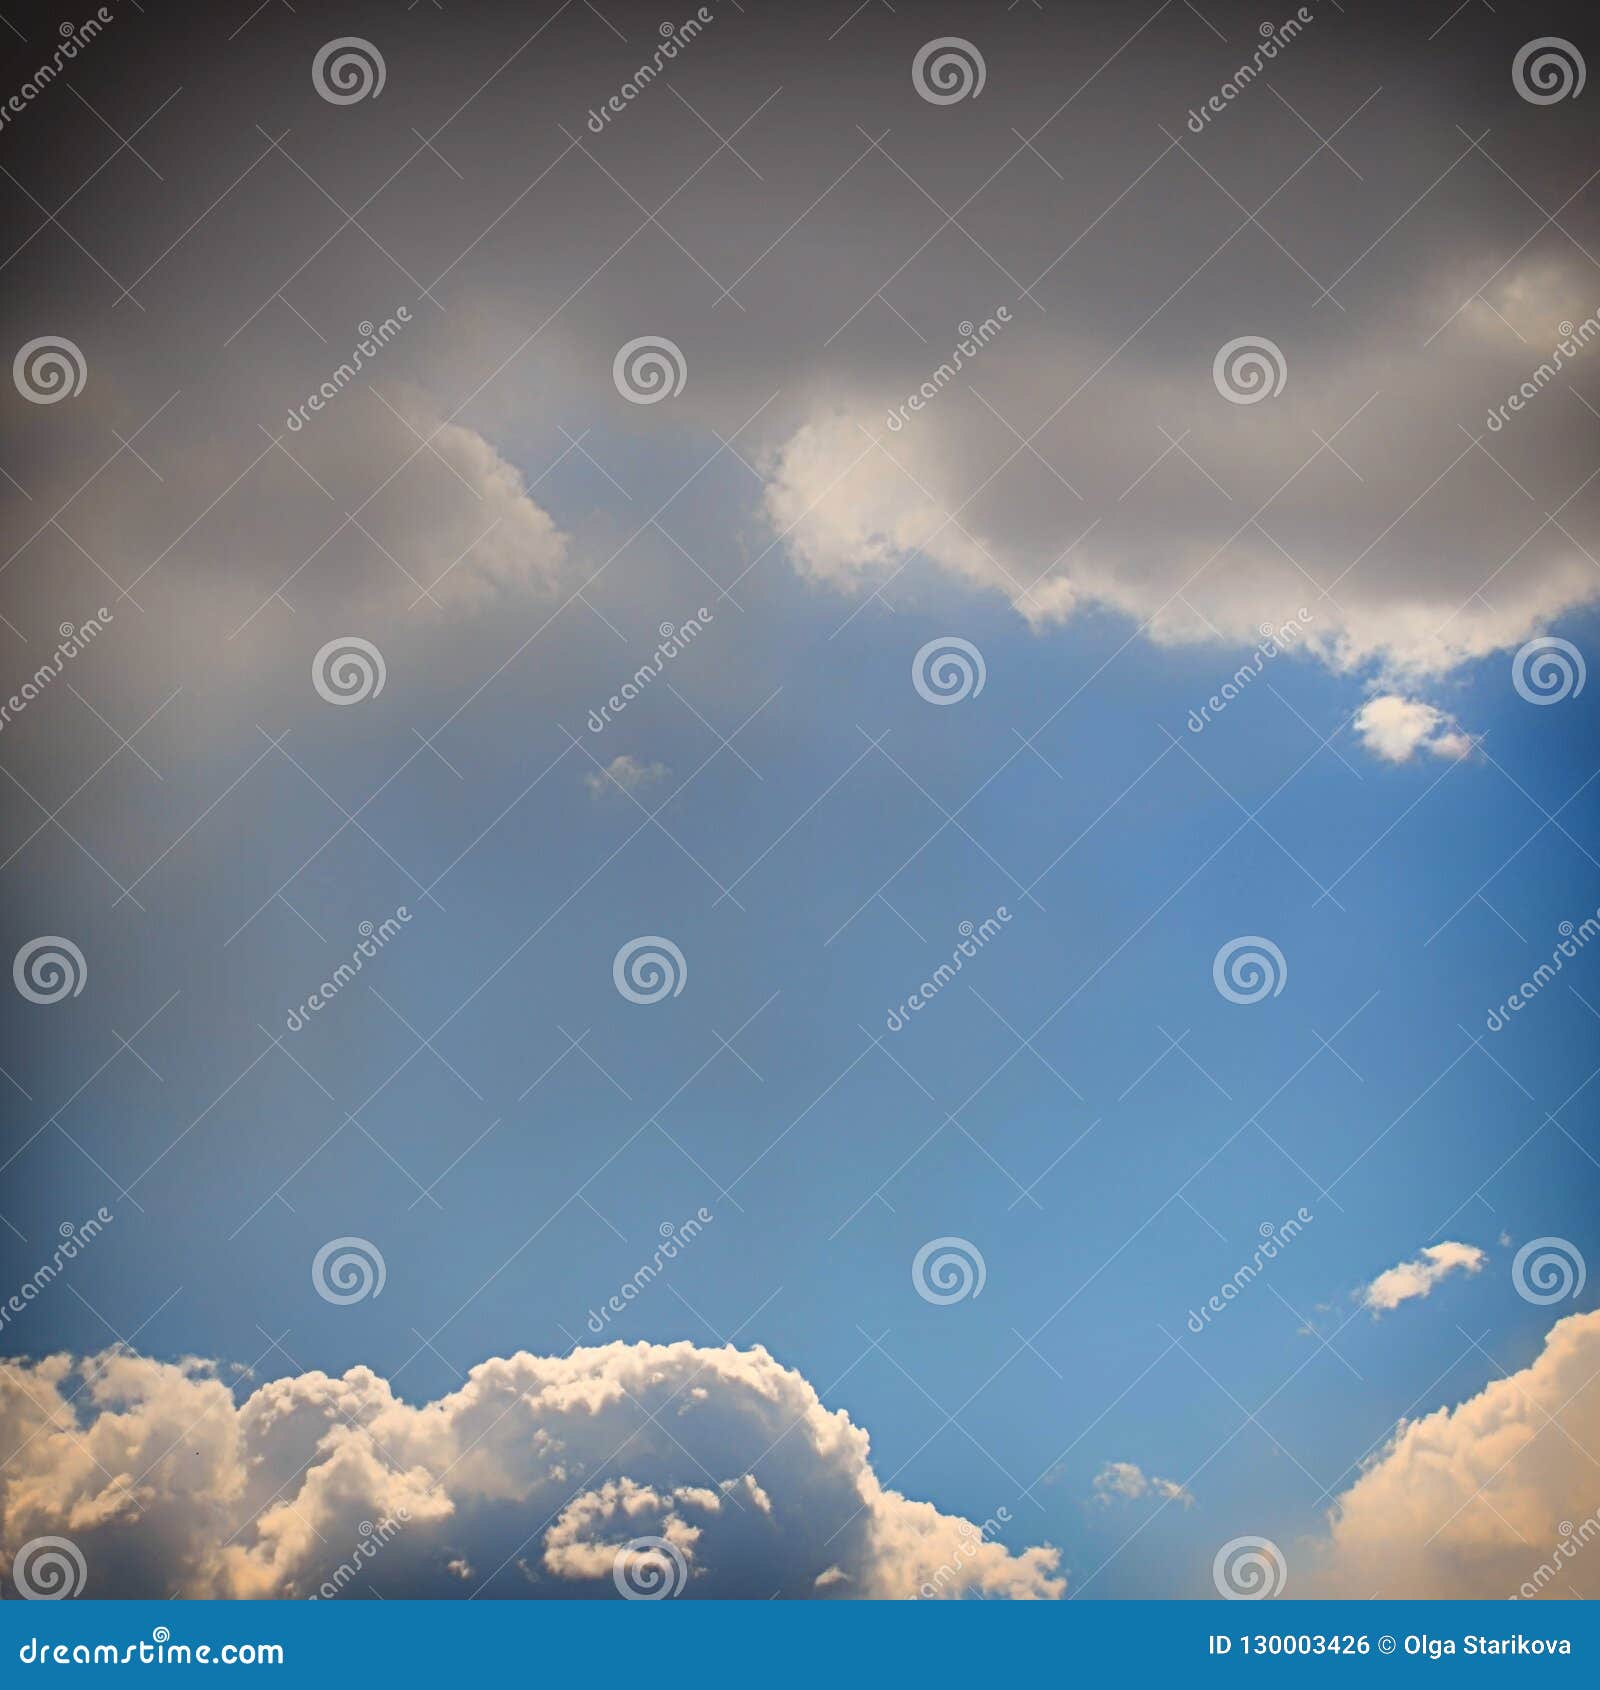 Nature Background. Fluffy Soft Clouds In Sky Toned. Stock Photo - Image ...